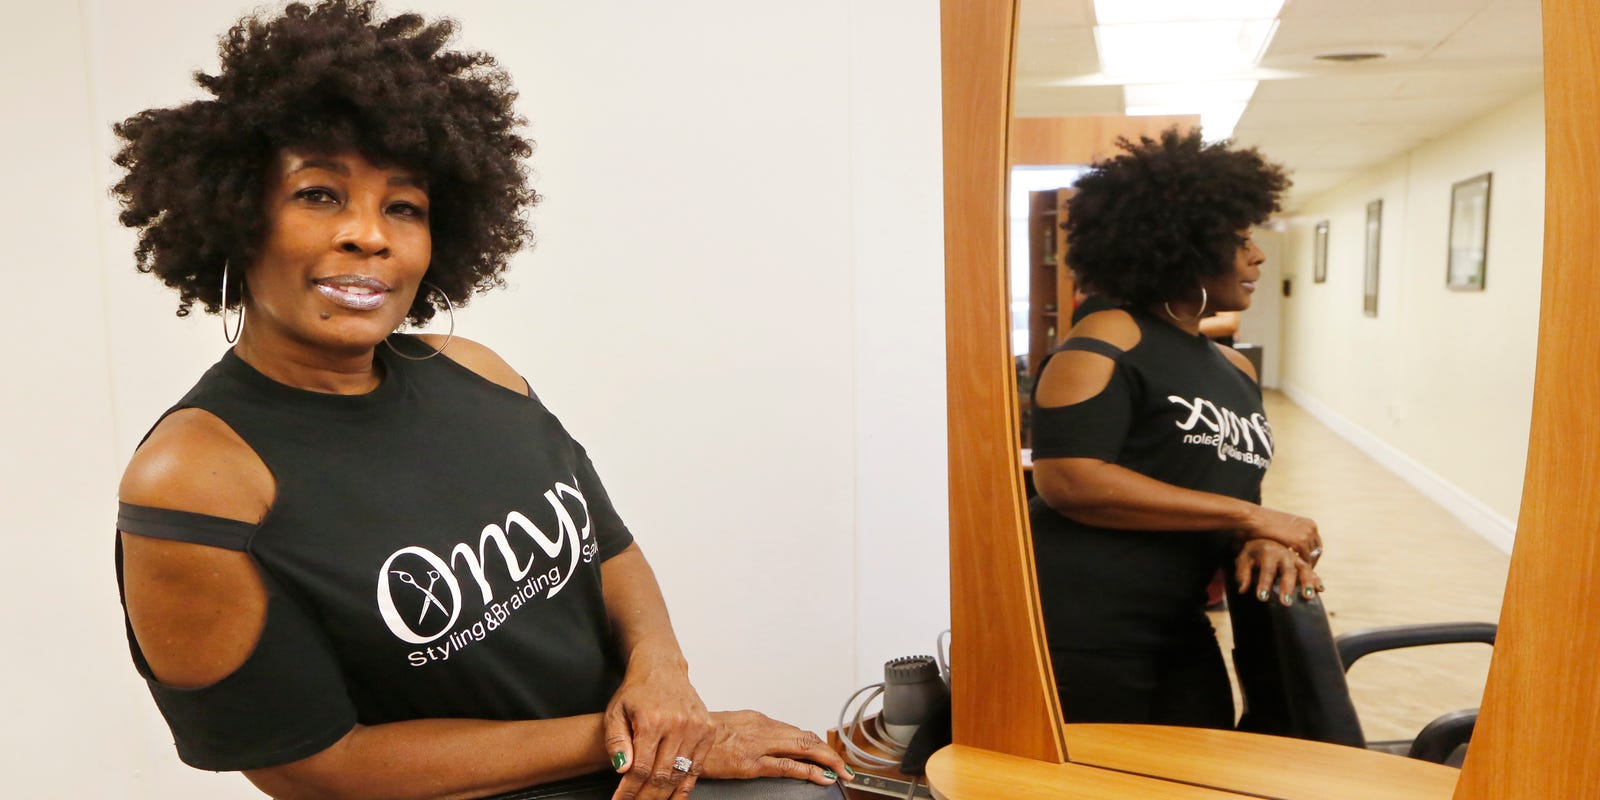 Onyx Salon owner retires after 40 years of styling African American hair